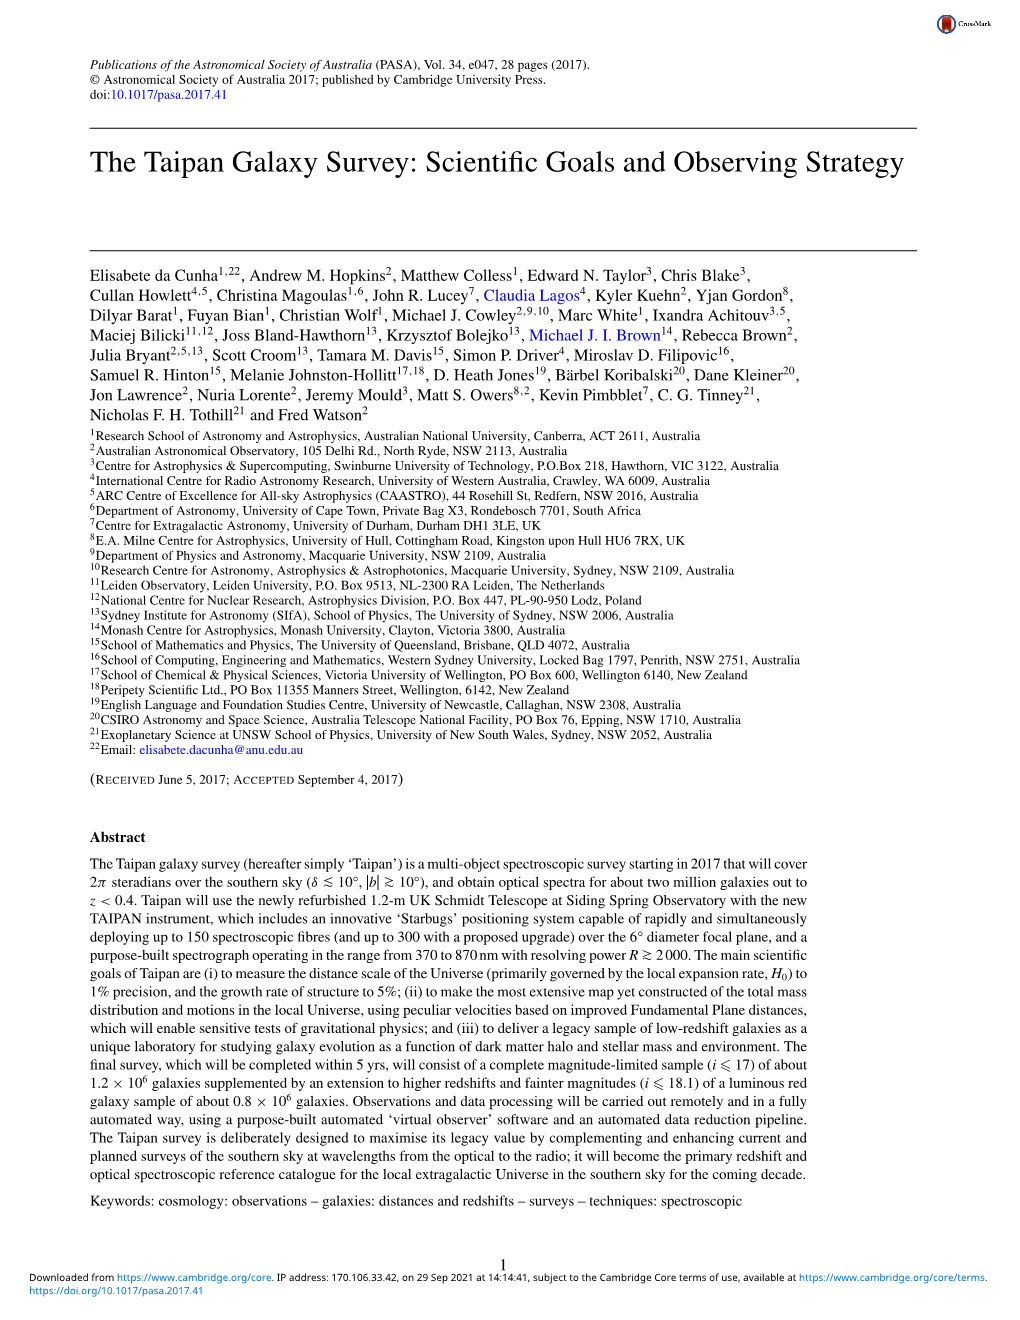 The Taipan Galaxy Survey: Scientific Goals and Observing Strategy